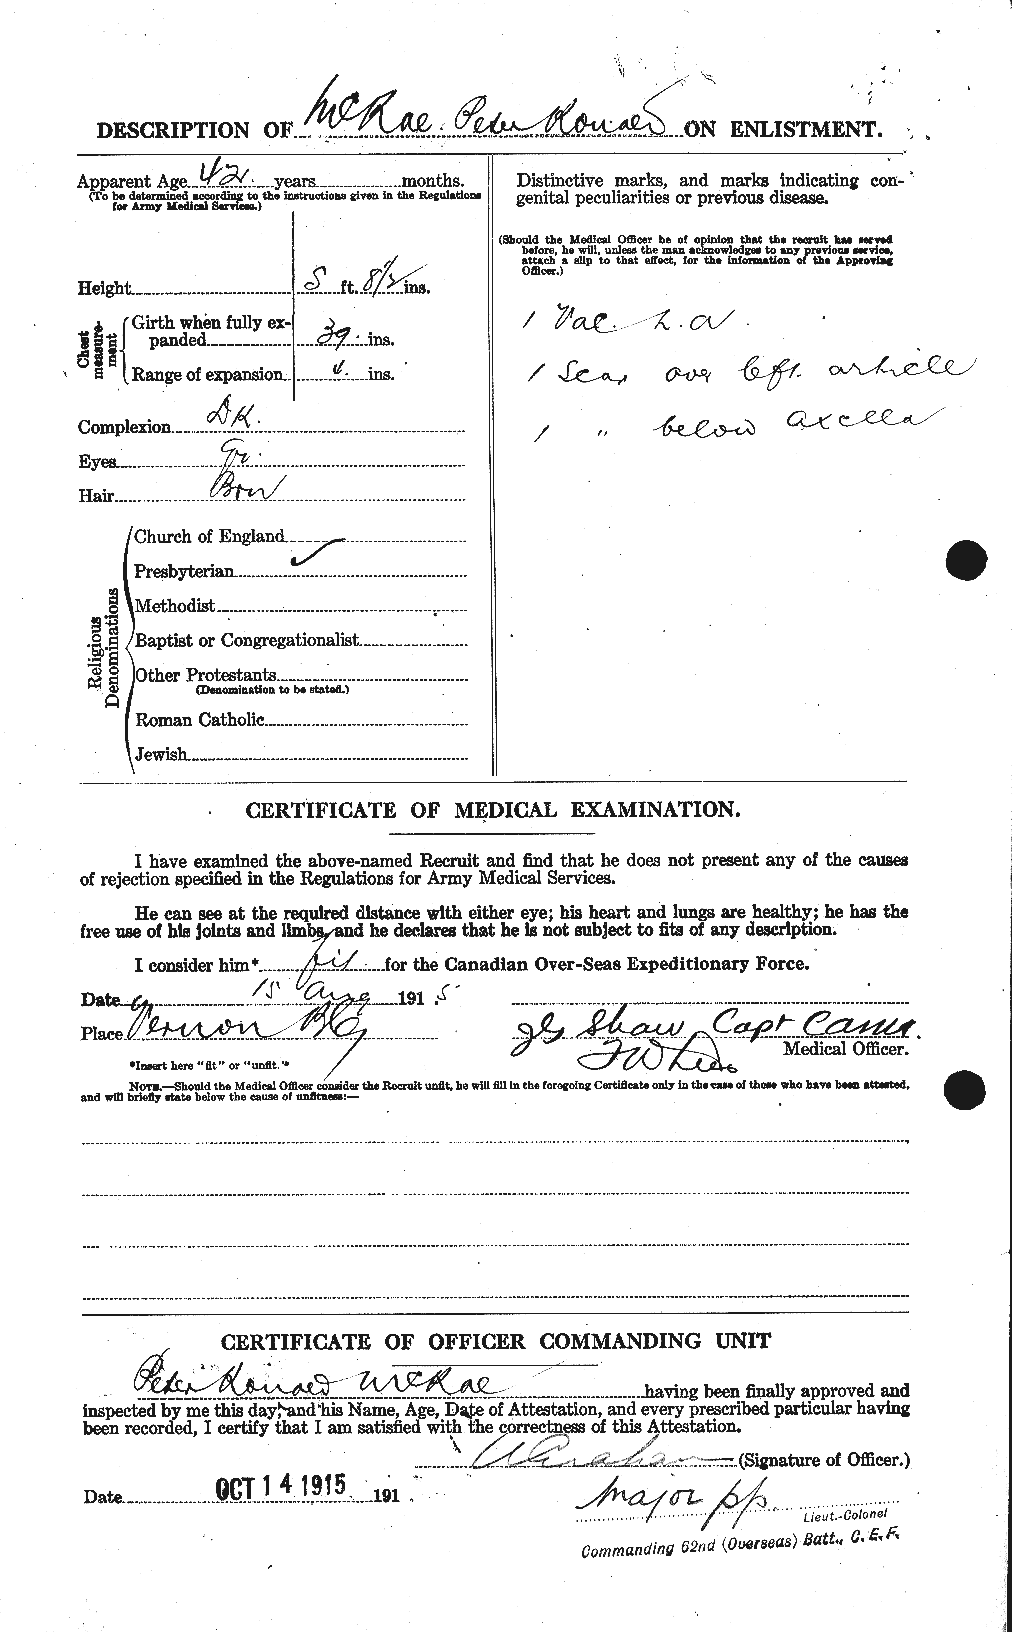 Personnel Records of the First World War - CEF 542910b